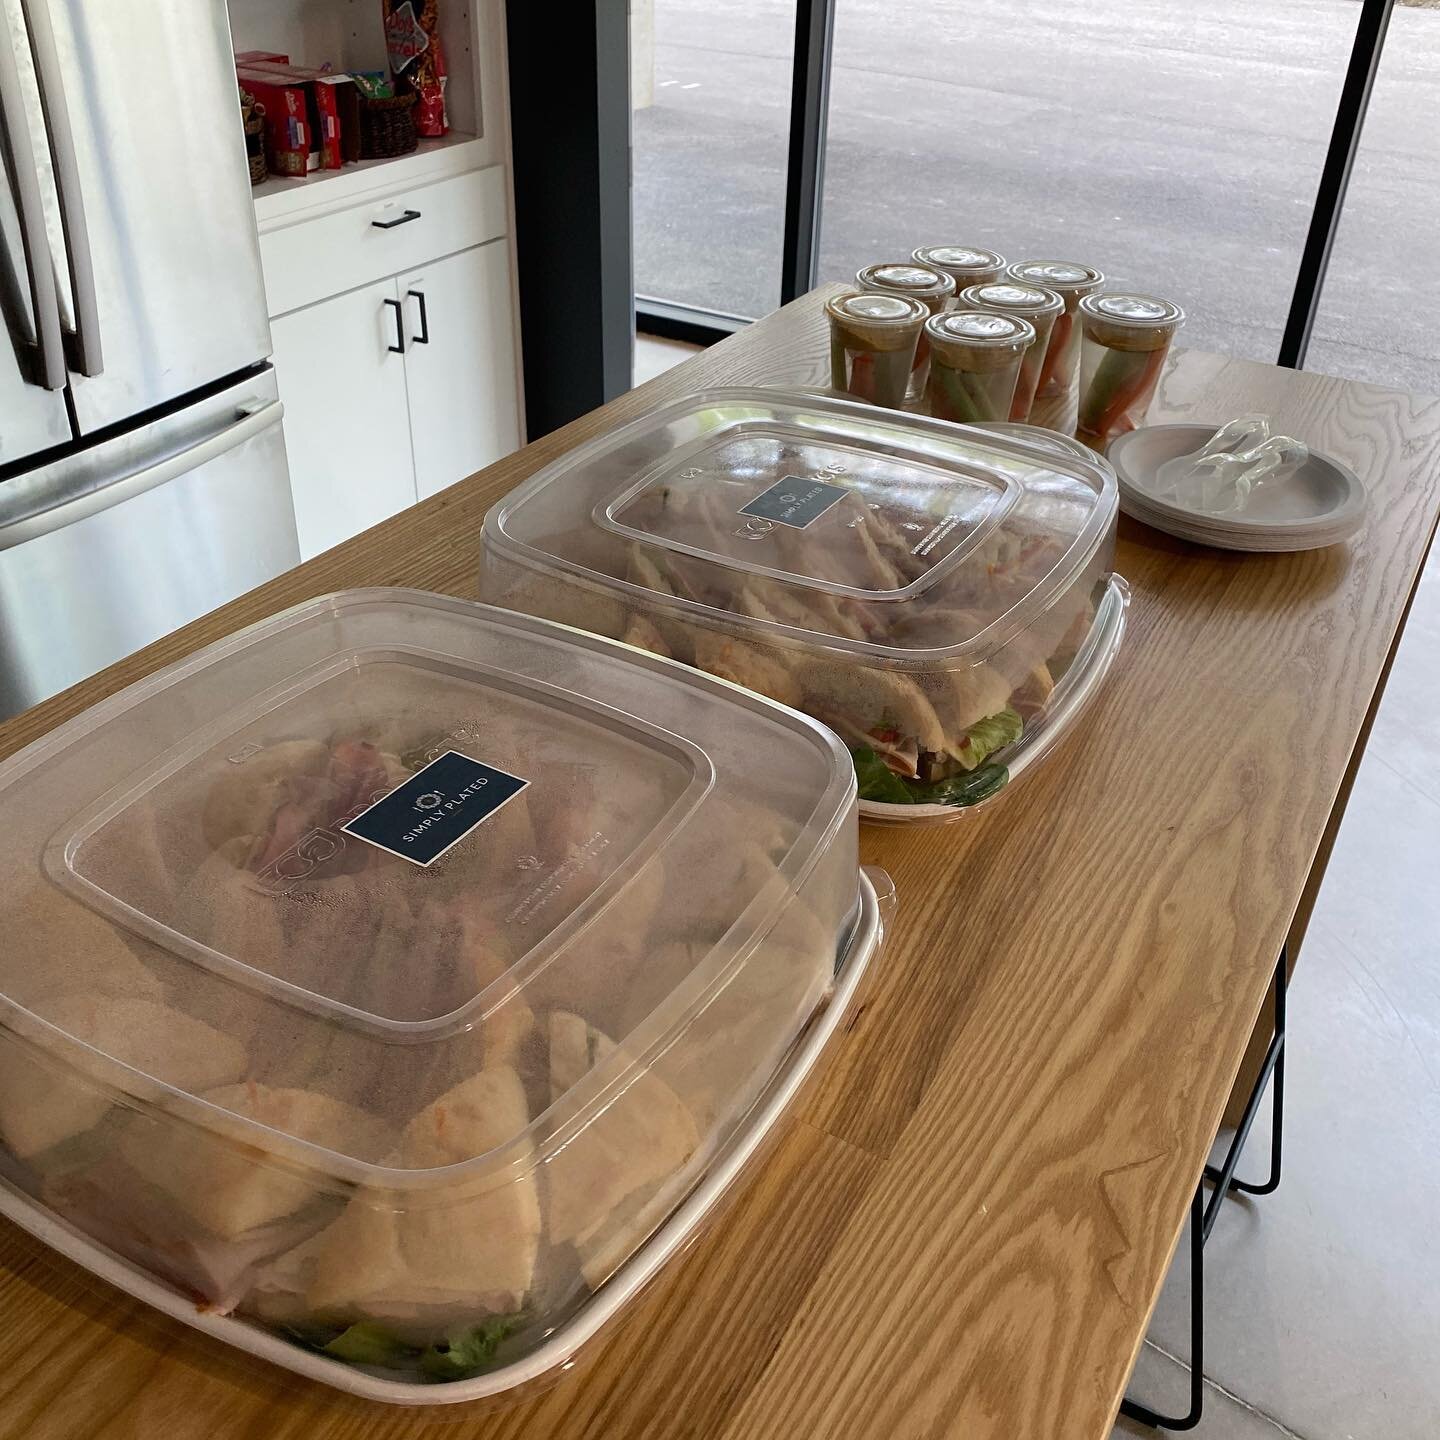 Evening drop off to the Pelotonia office the next few days! 
.
.
Looking for a quick easy way to provide catering for an upcoming meeting, event or special gathering?
.
.
Look no further! Our catering team can help
.
.
View our drop off catering menu